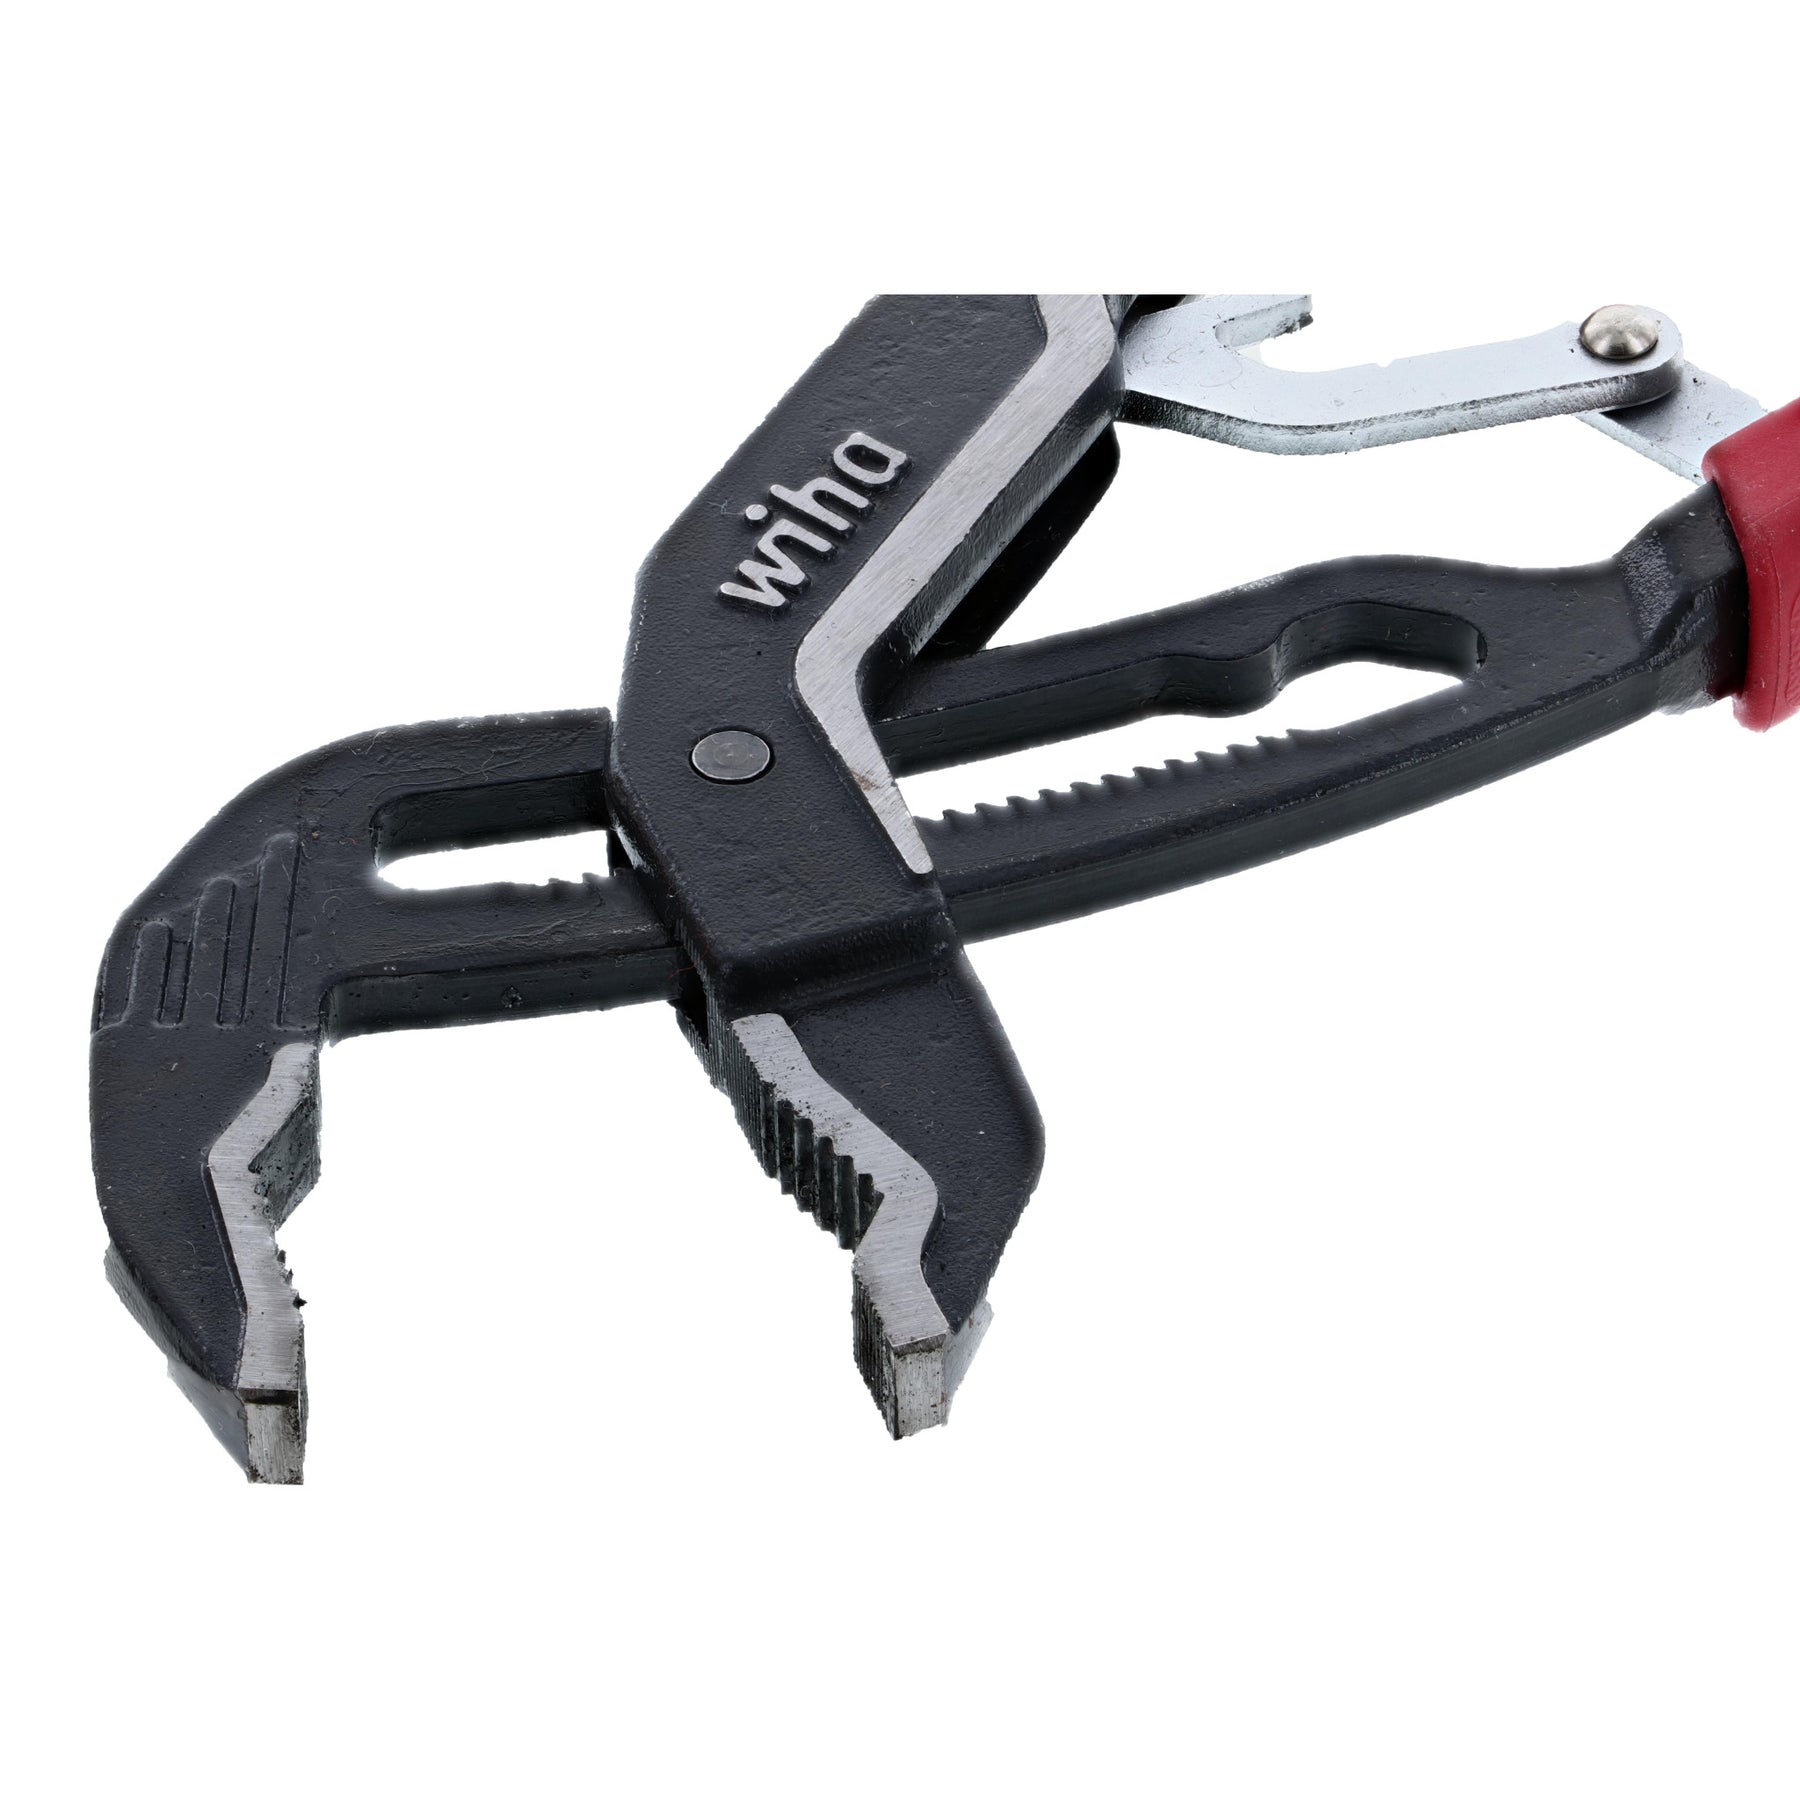 2 Piece Classic Grip Pliers Wrench and Auto Pliers Set